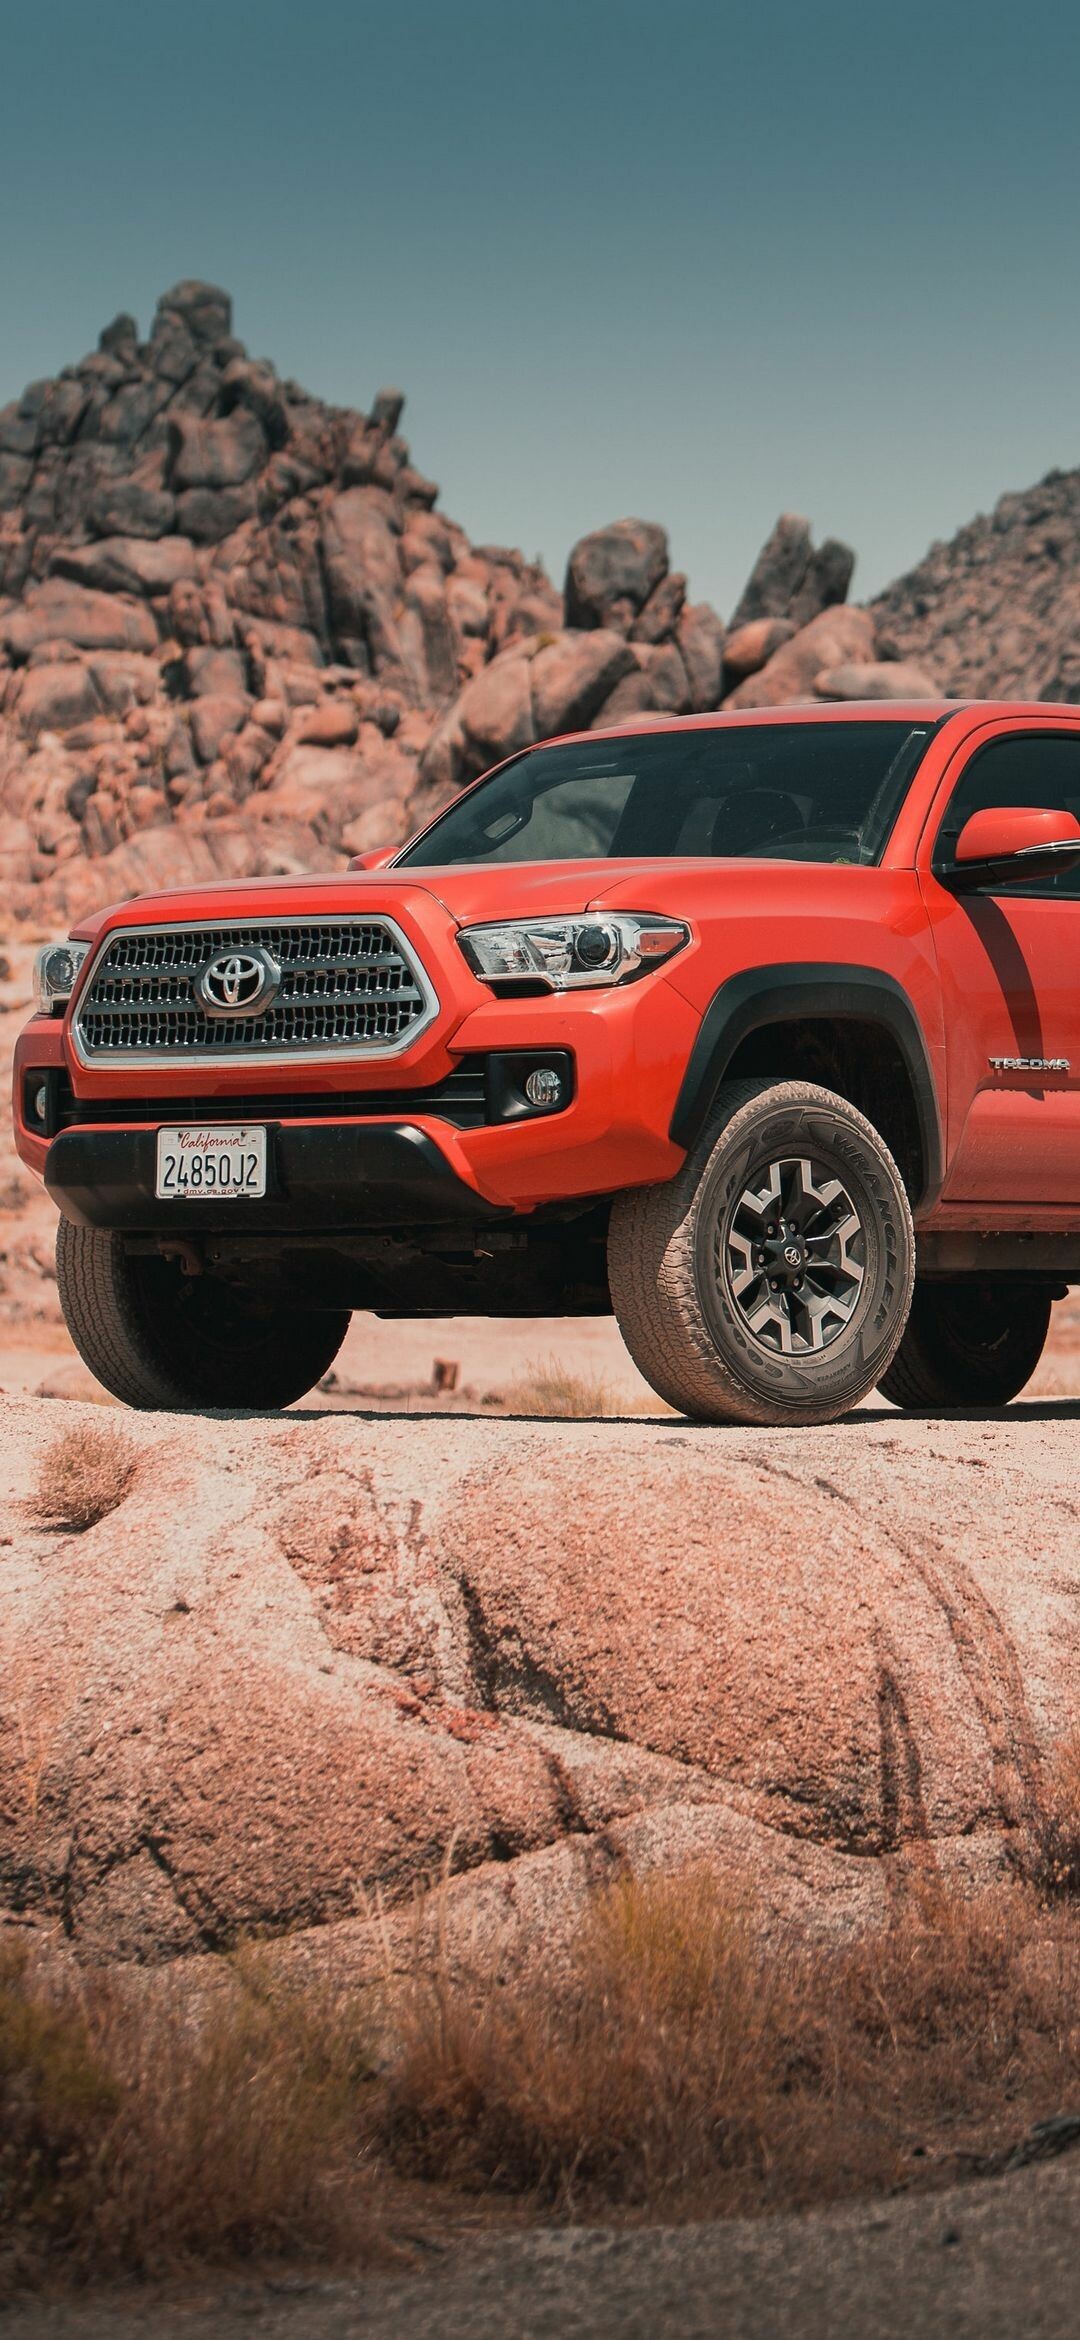 Toyota Tacoma: An "Ironman" edition was released, named after Ivan "Ironman" Stewart, in 2008. 1080x2340 HD Wallpaper.